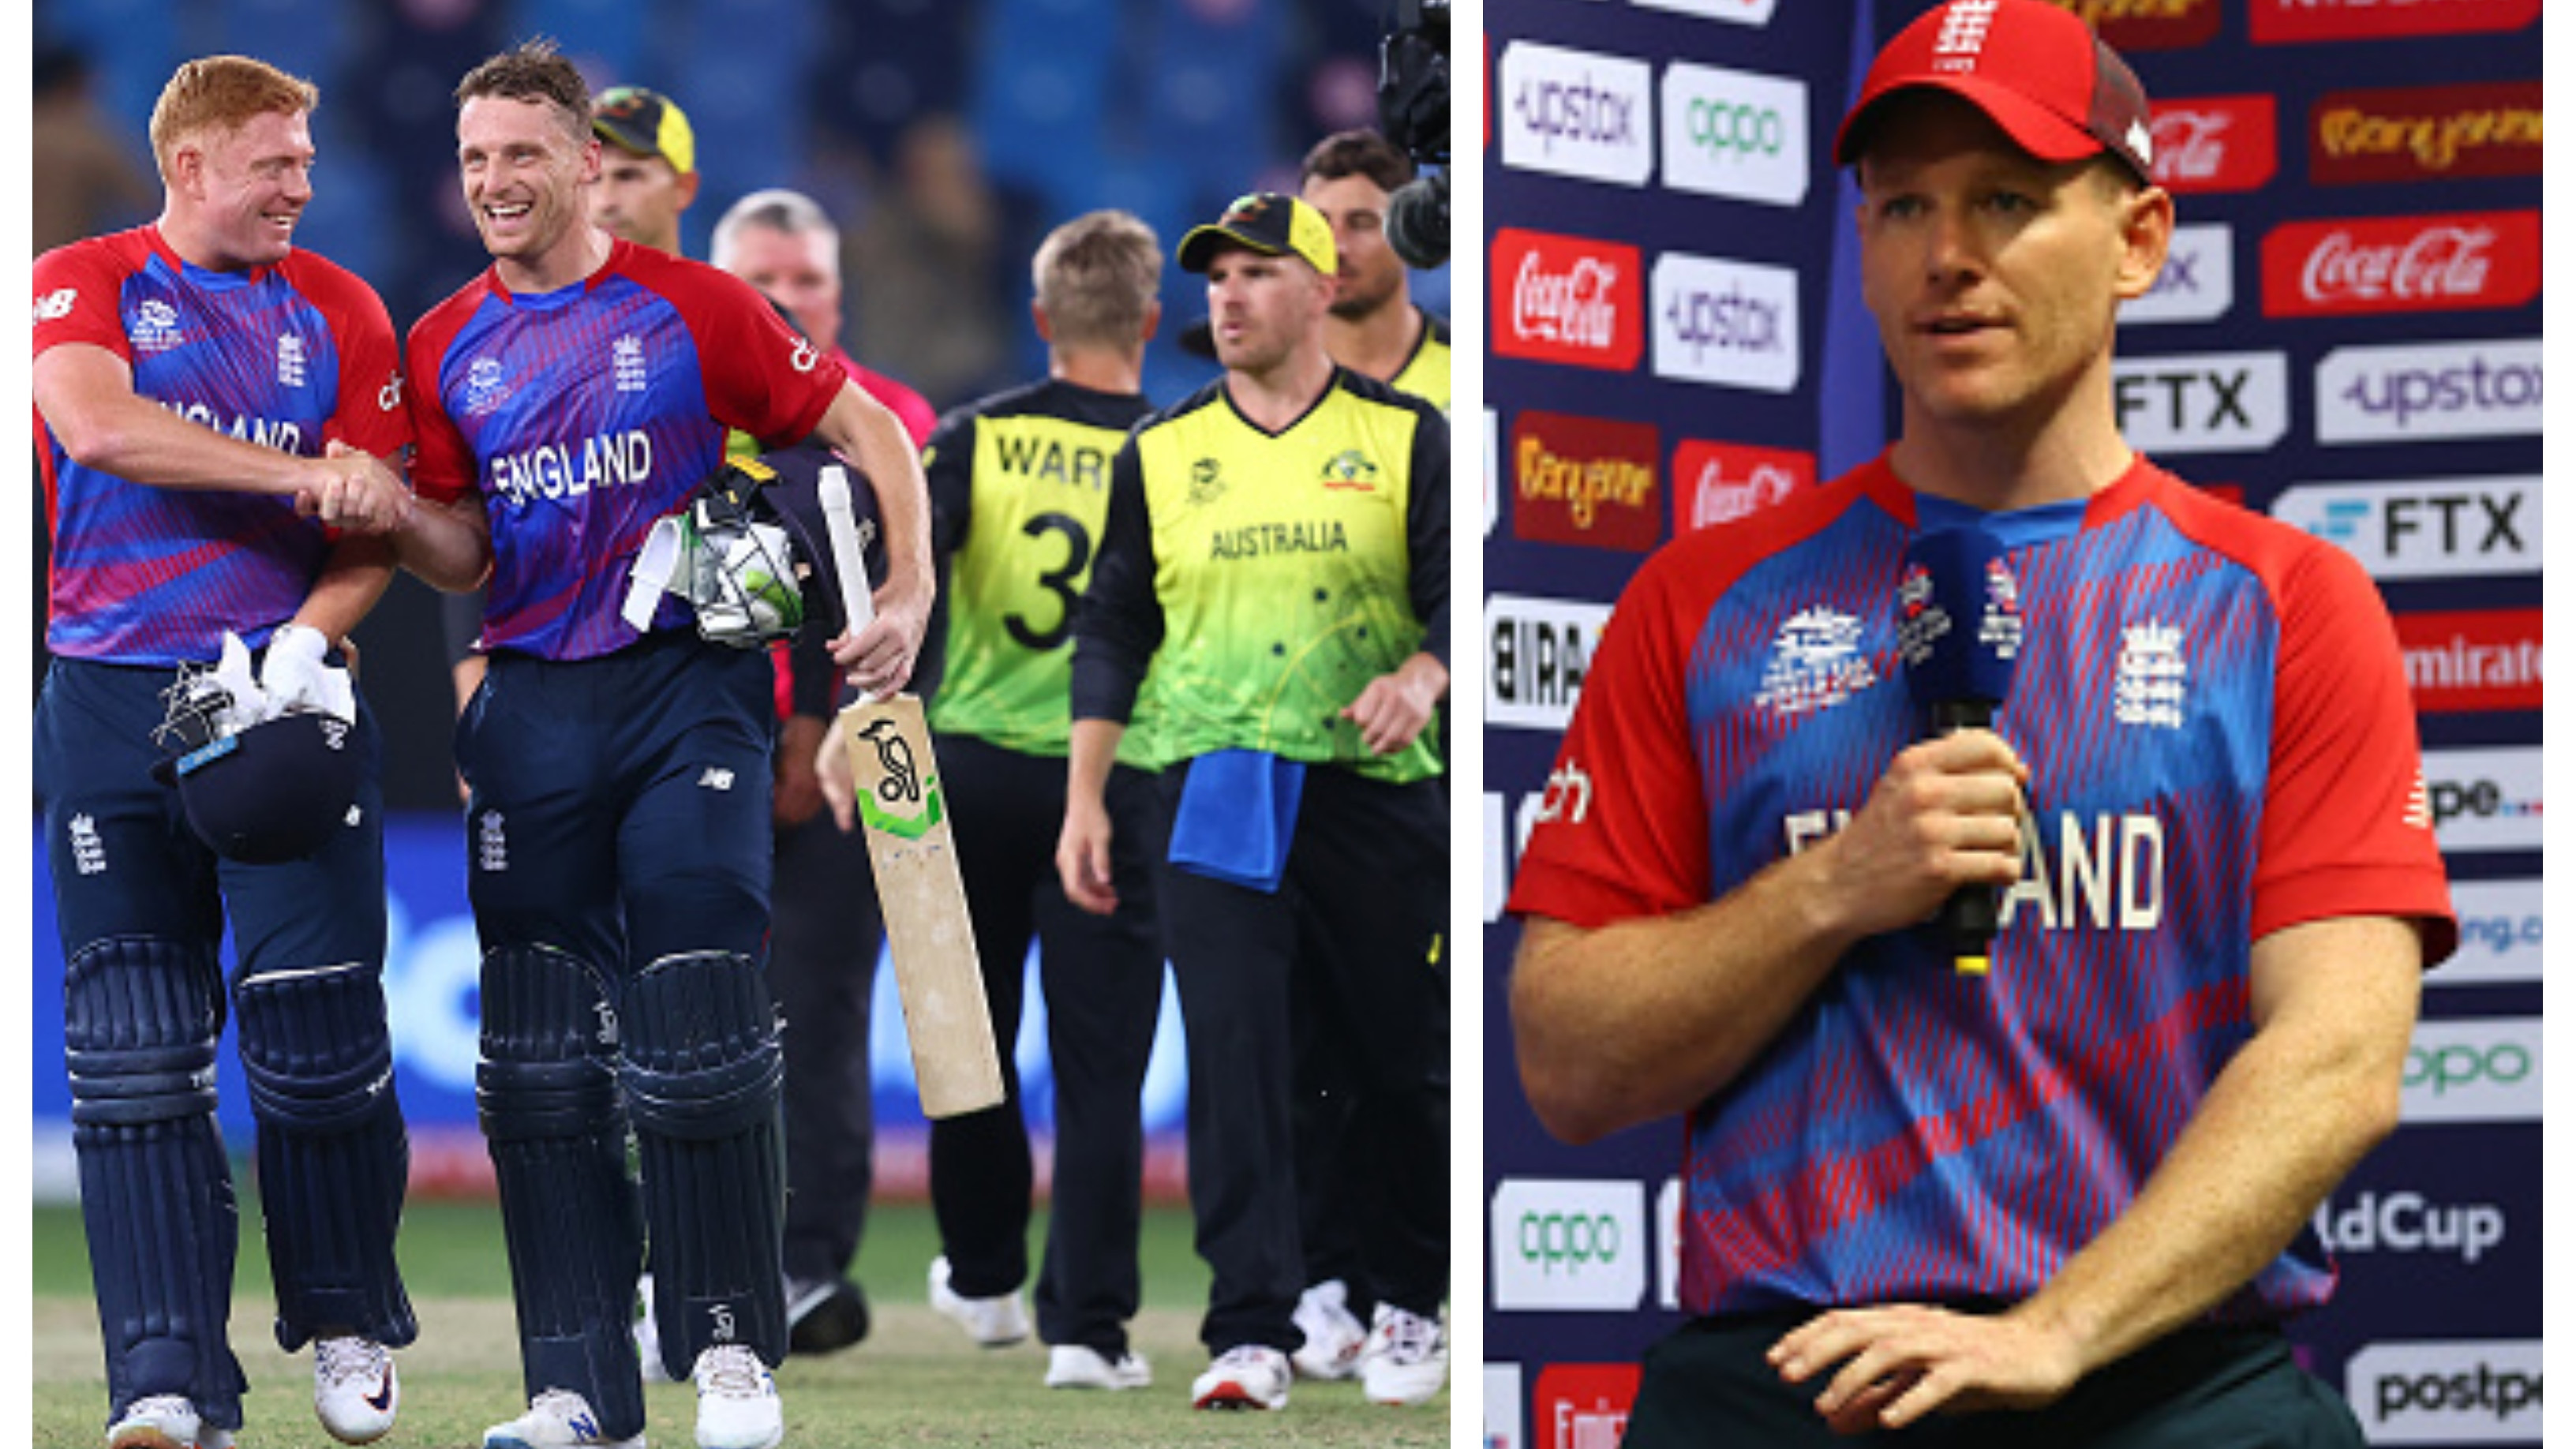 T20 World Cup 2021: England have adapted well to UAE conditions, says Eoin Morgan after thrashing Australia